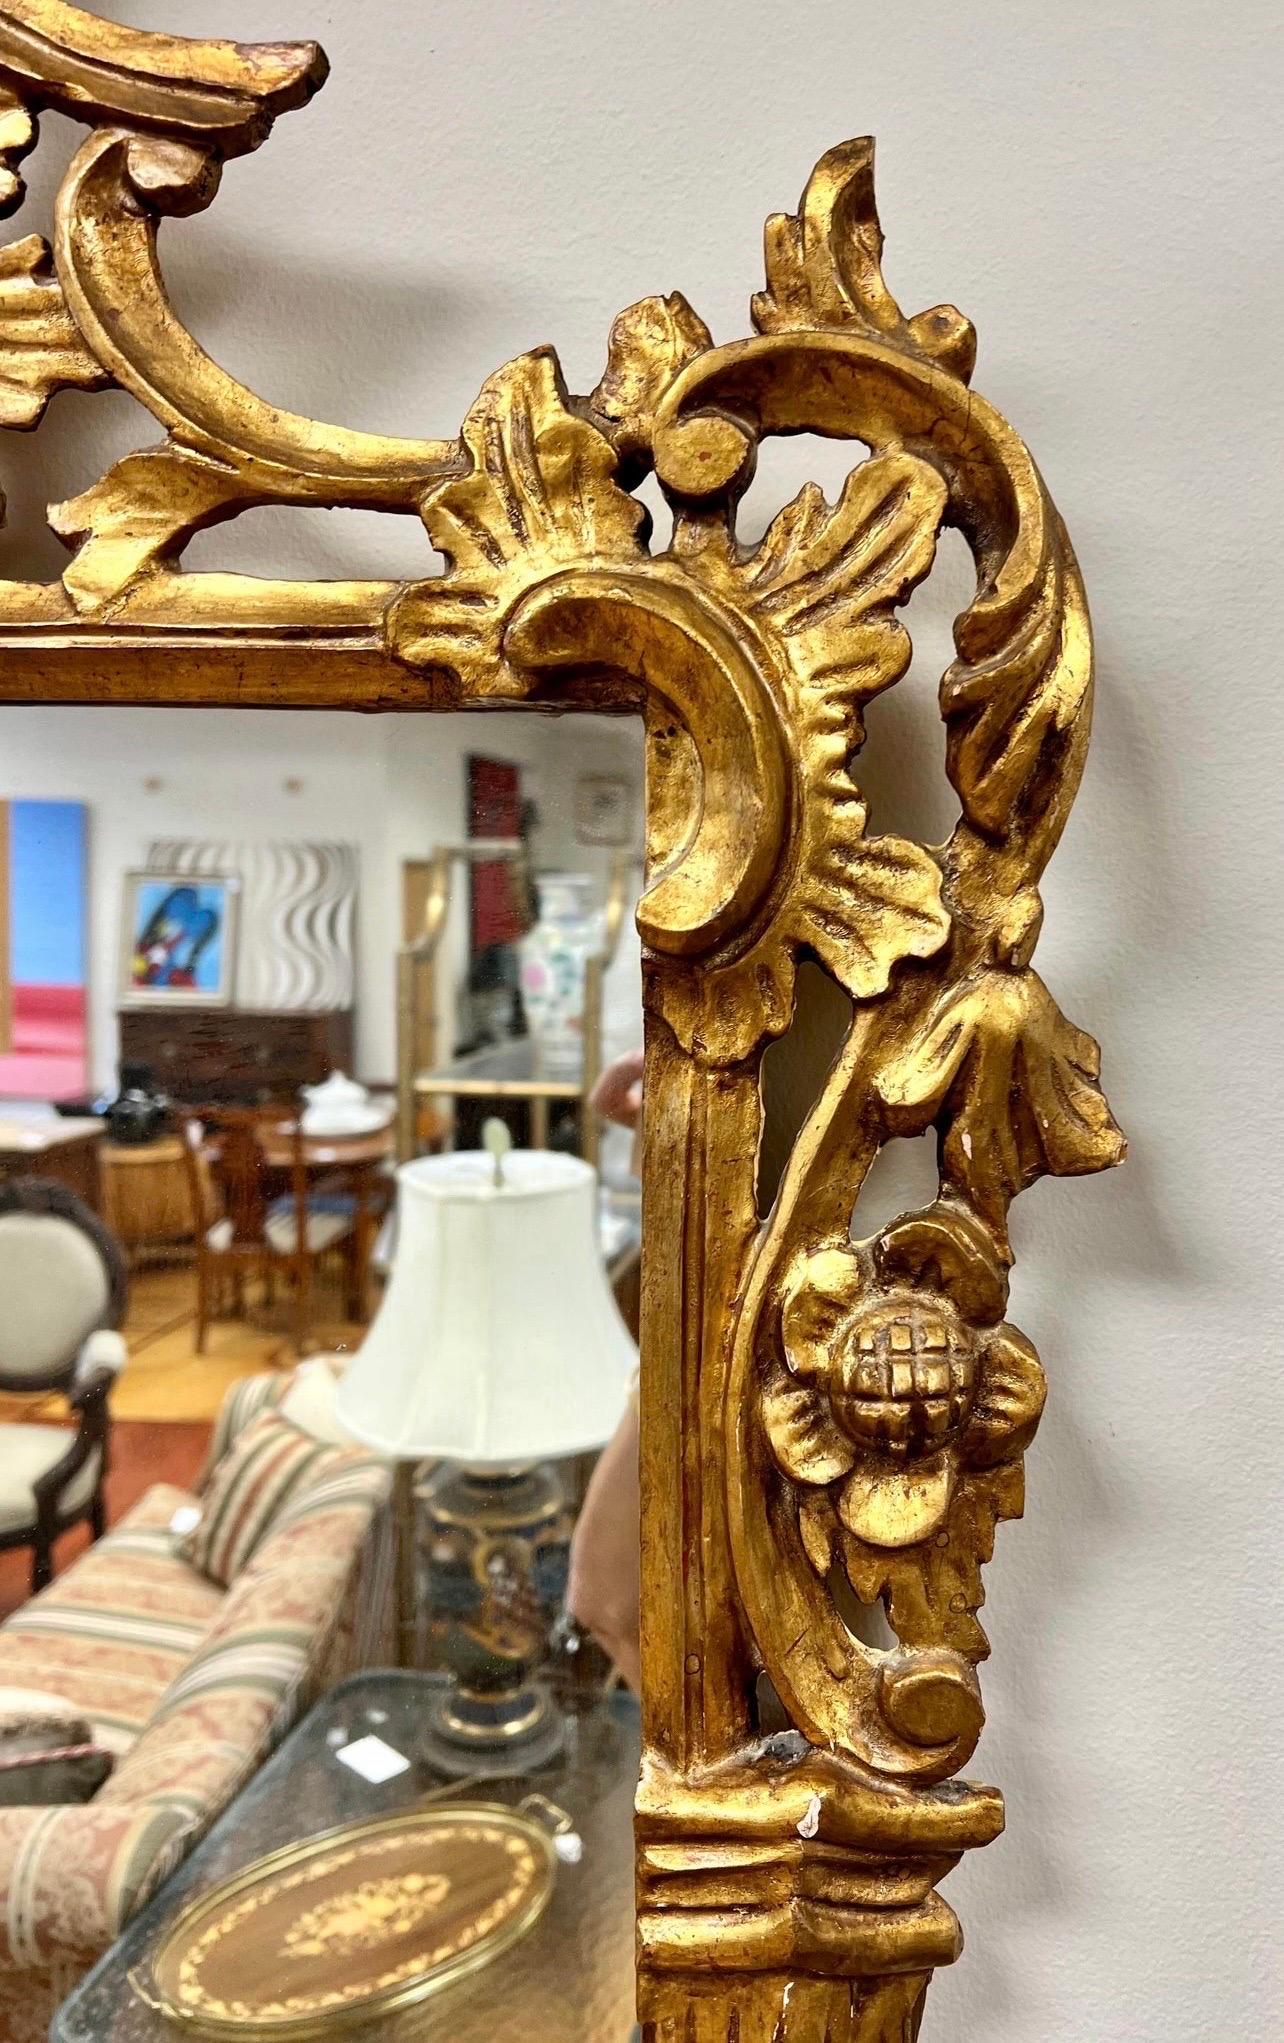 Spanish Antique Federal Carved Giltwood Rectangular Mirror with Eagle Pediment at Top